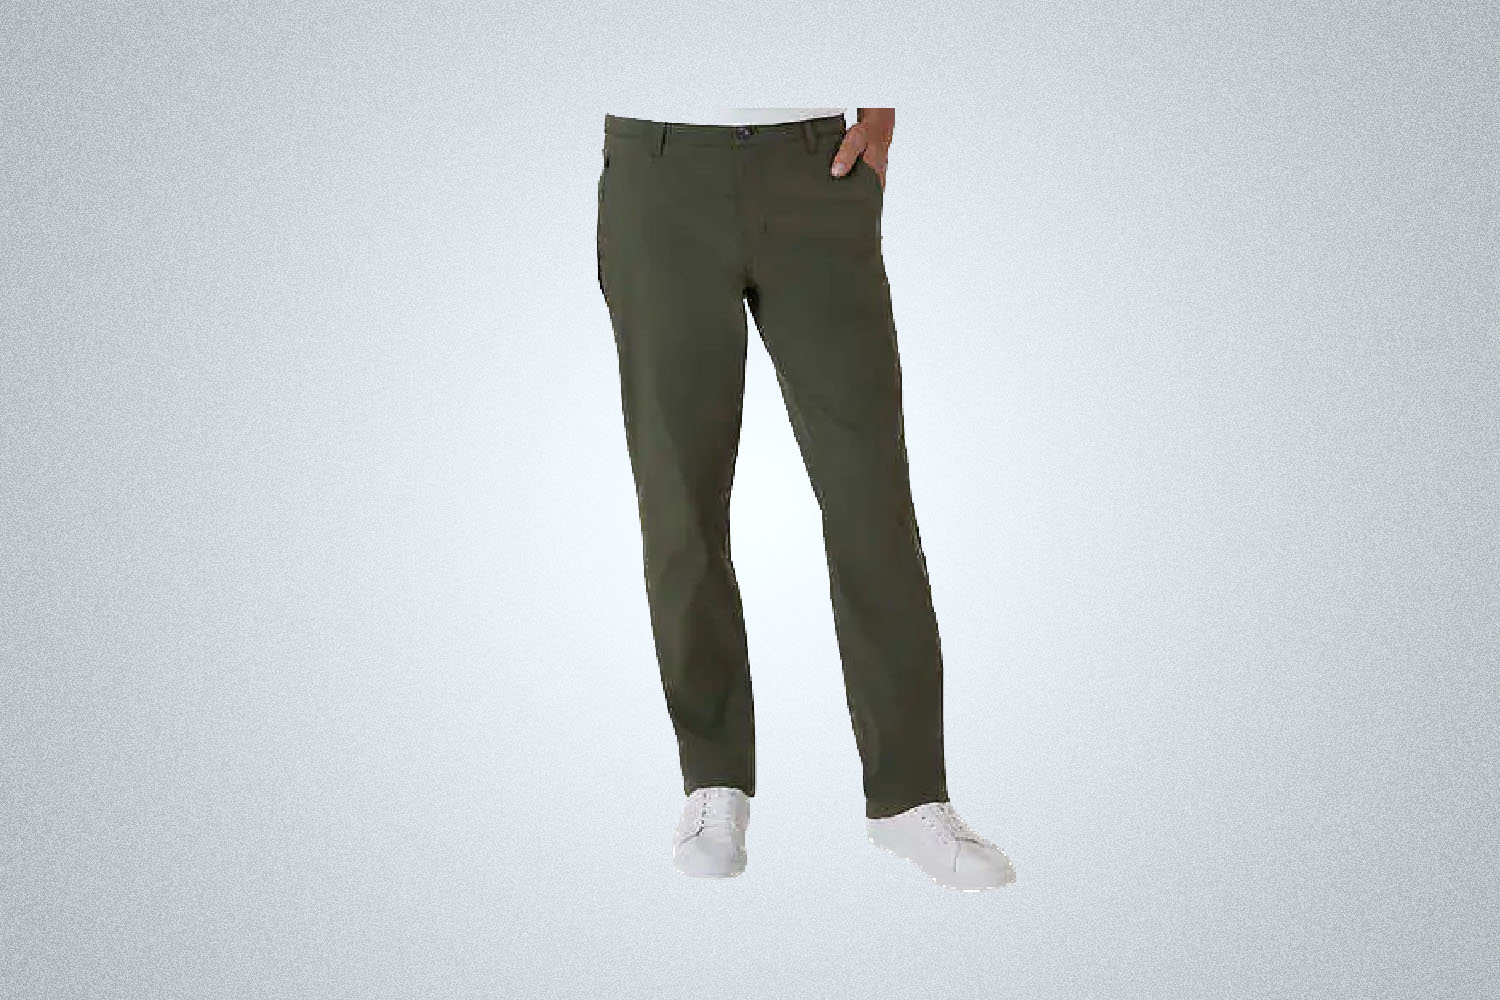 Weather Proof Vintage Pants Any good? 